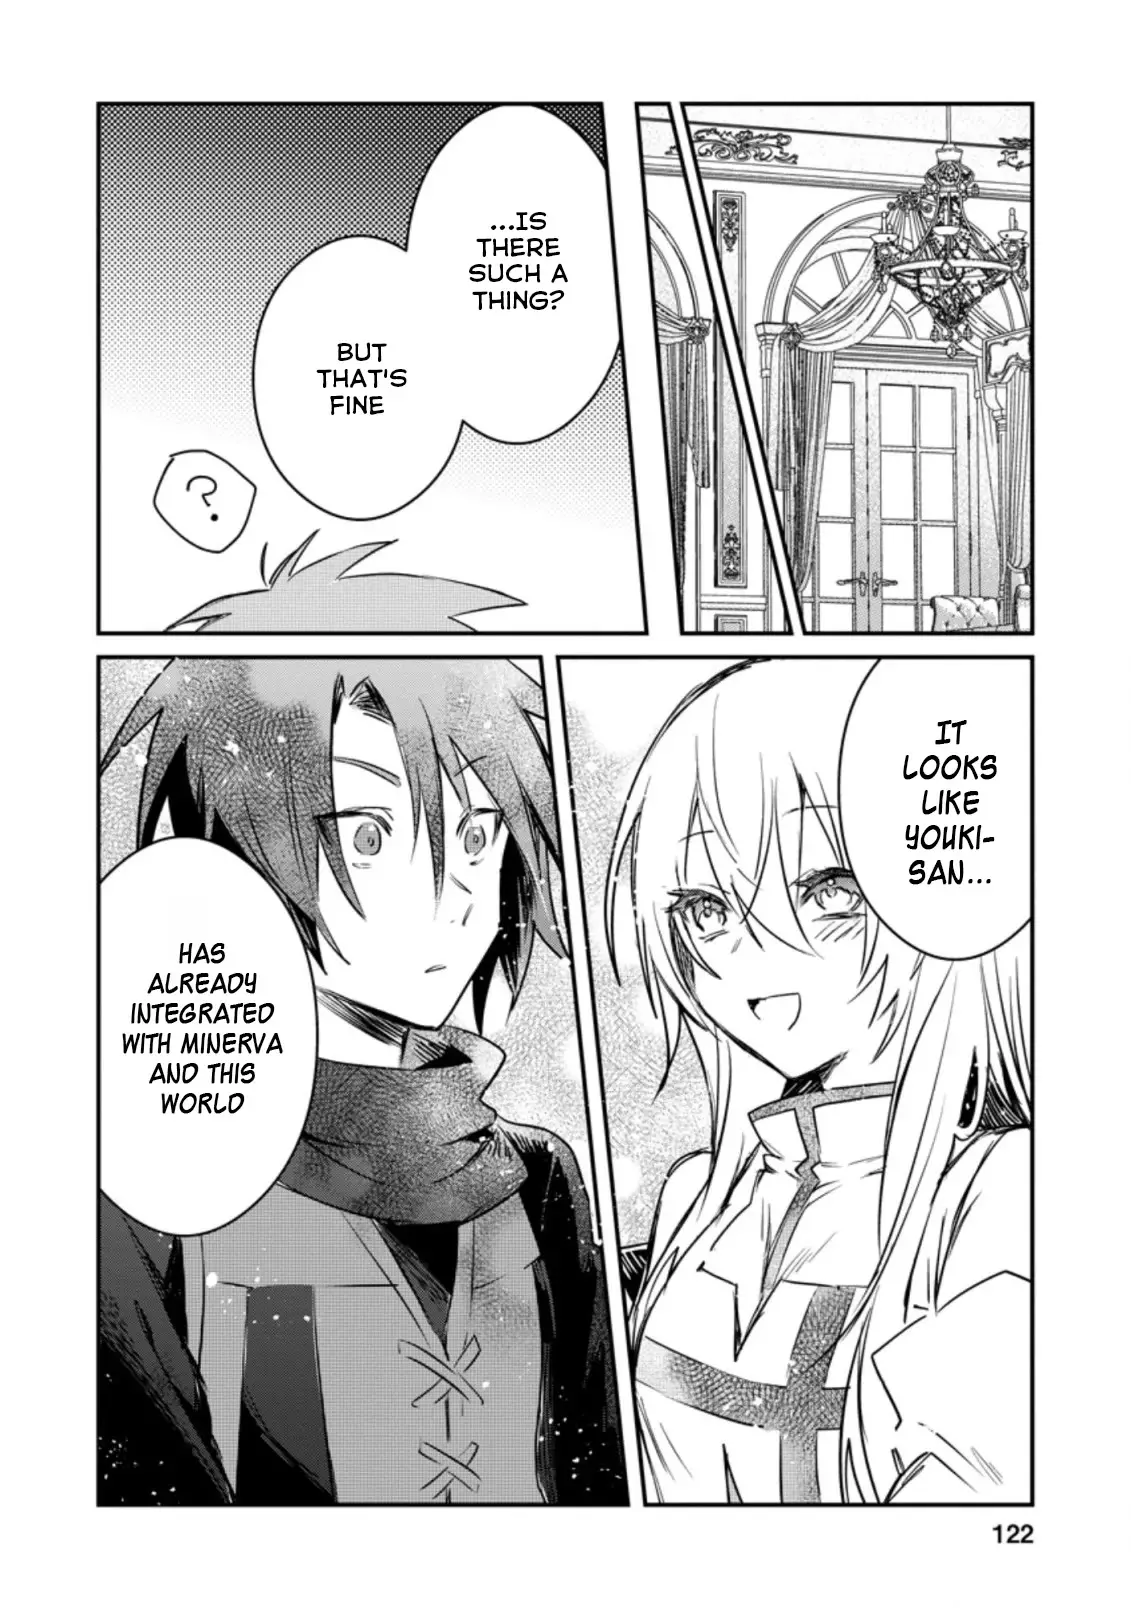 There Was A Cute Girl In The Hero’S Party, So I Tried Confessing To Her - 14 page 29-b1c28ec3